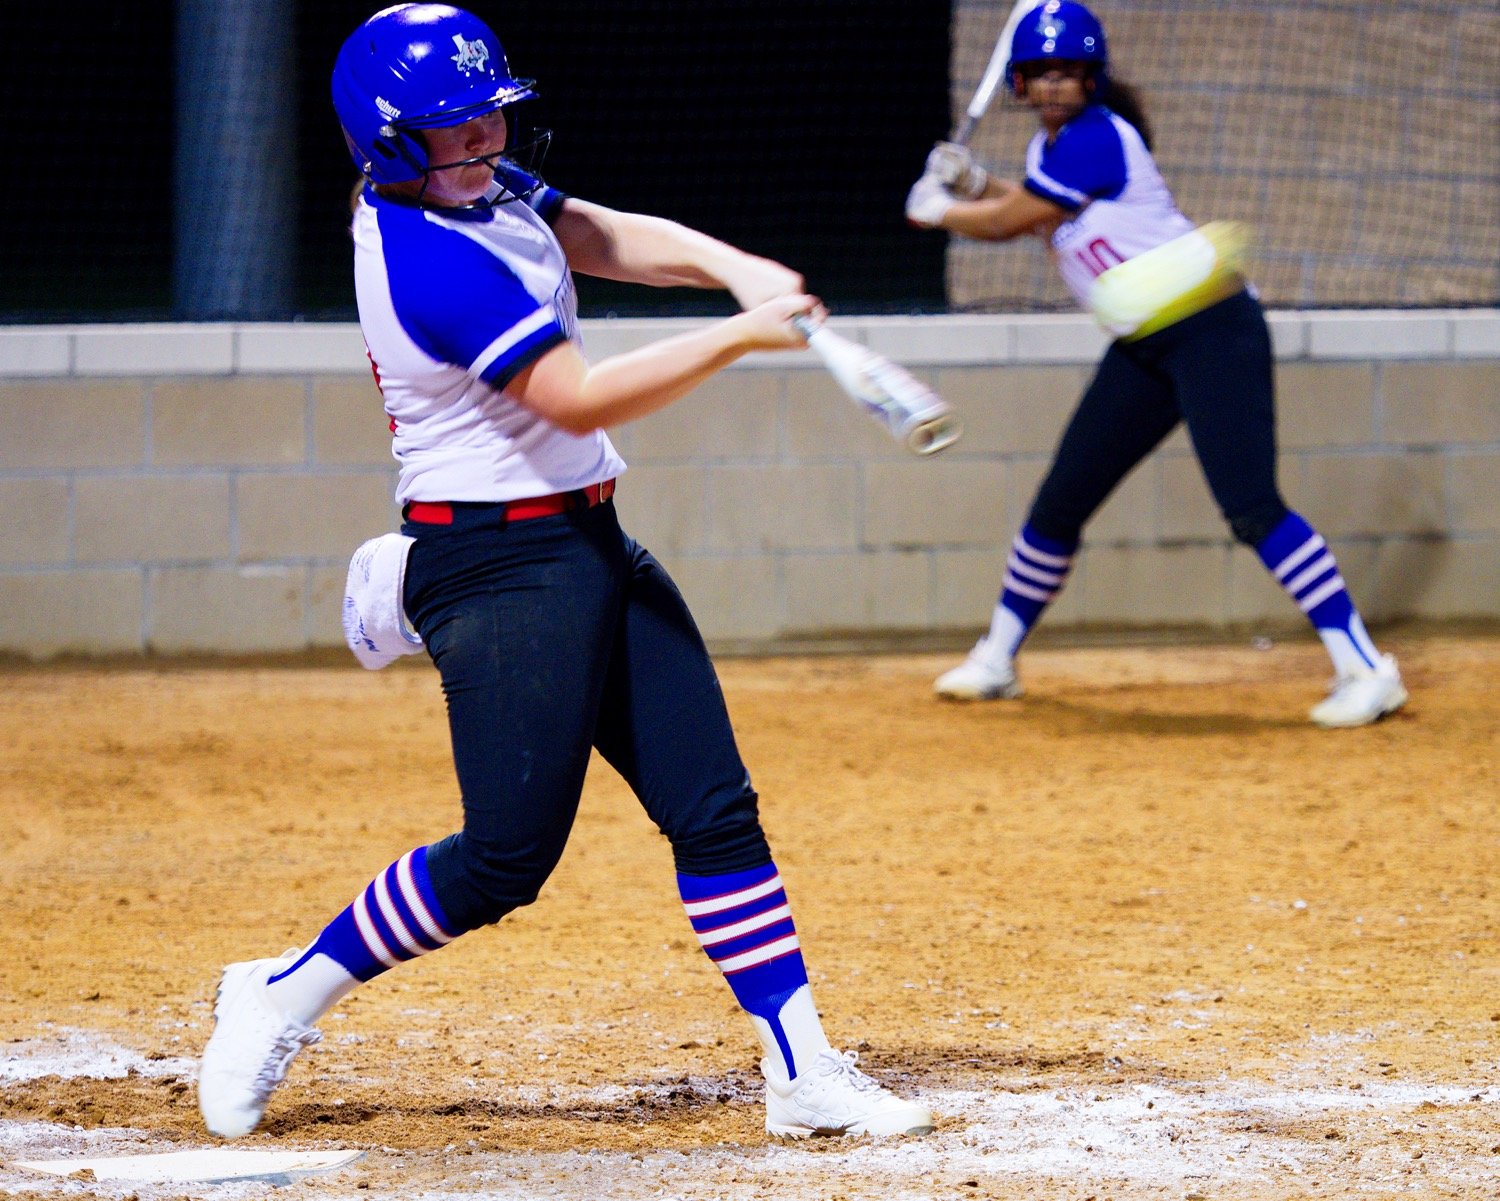 Kennedi Elmore scored the lone Quitman run with this swing of the bat, which carried over the fence in left-center field for a solo homer. [see more hits]